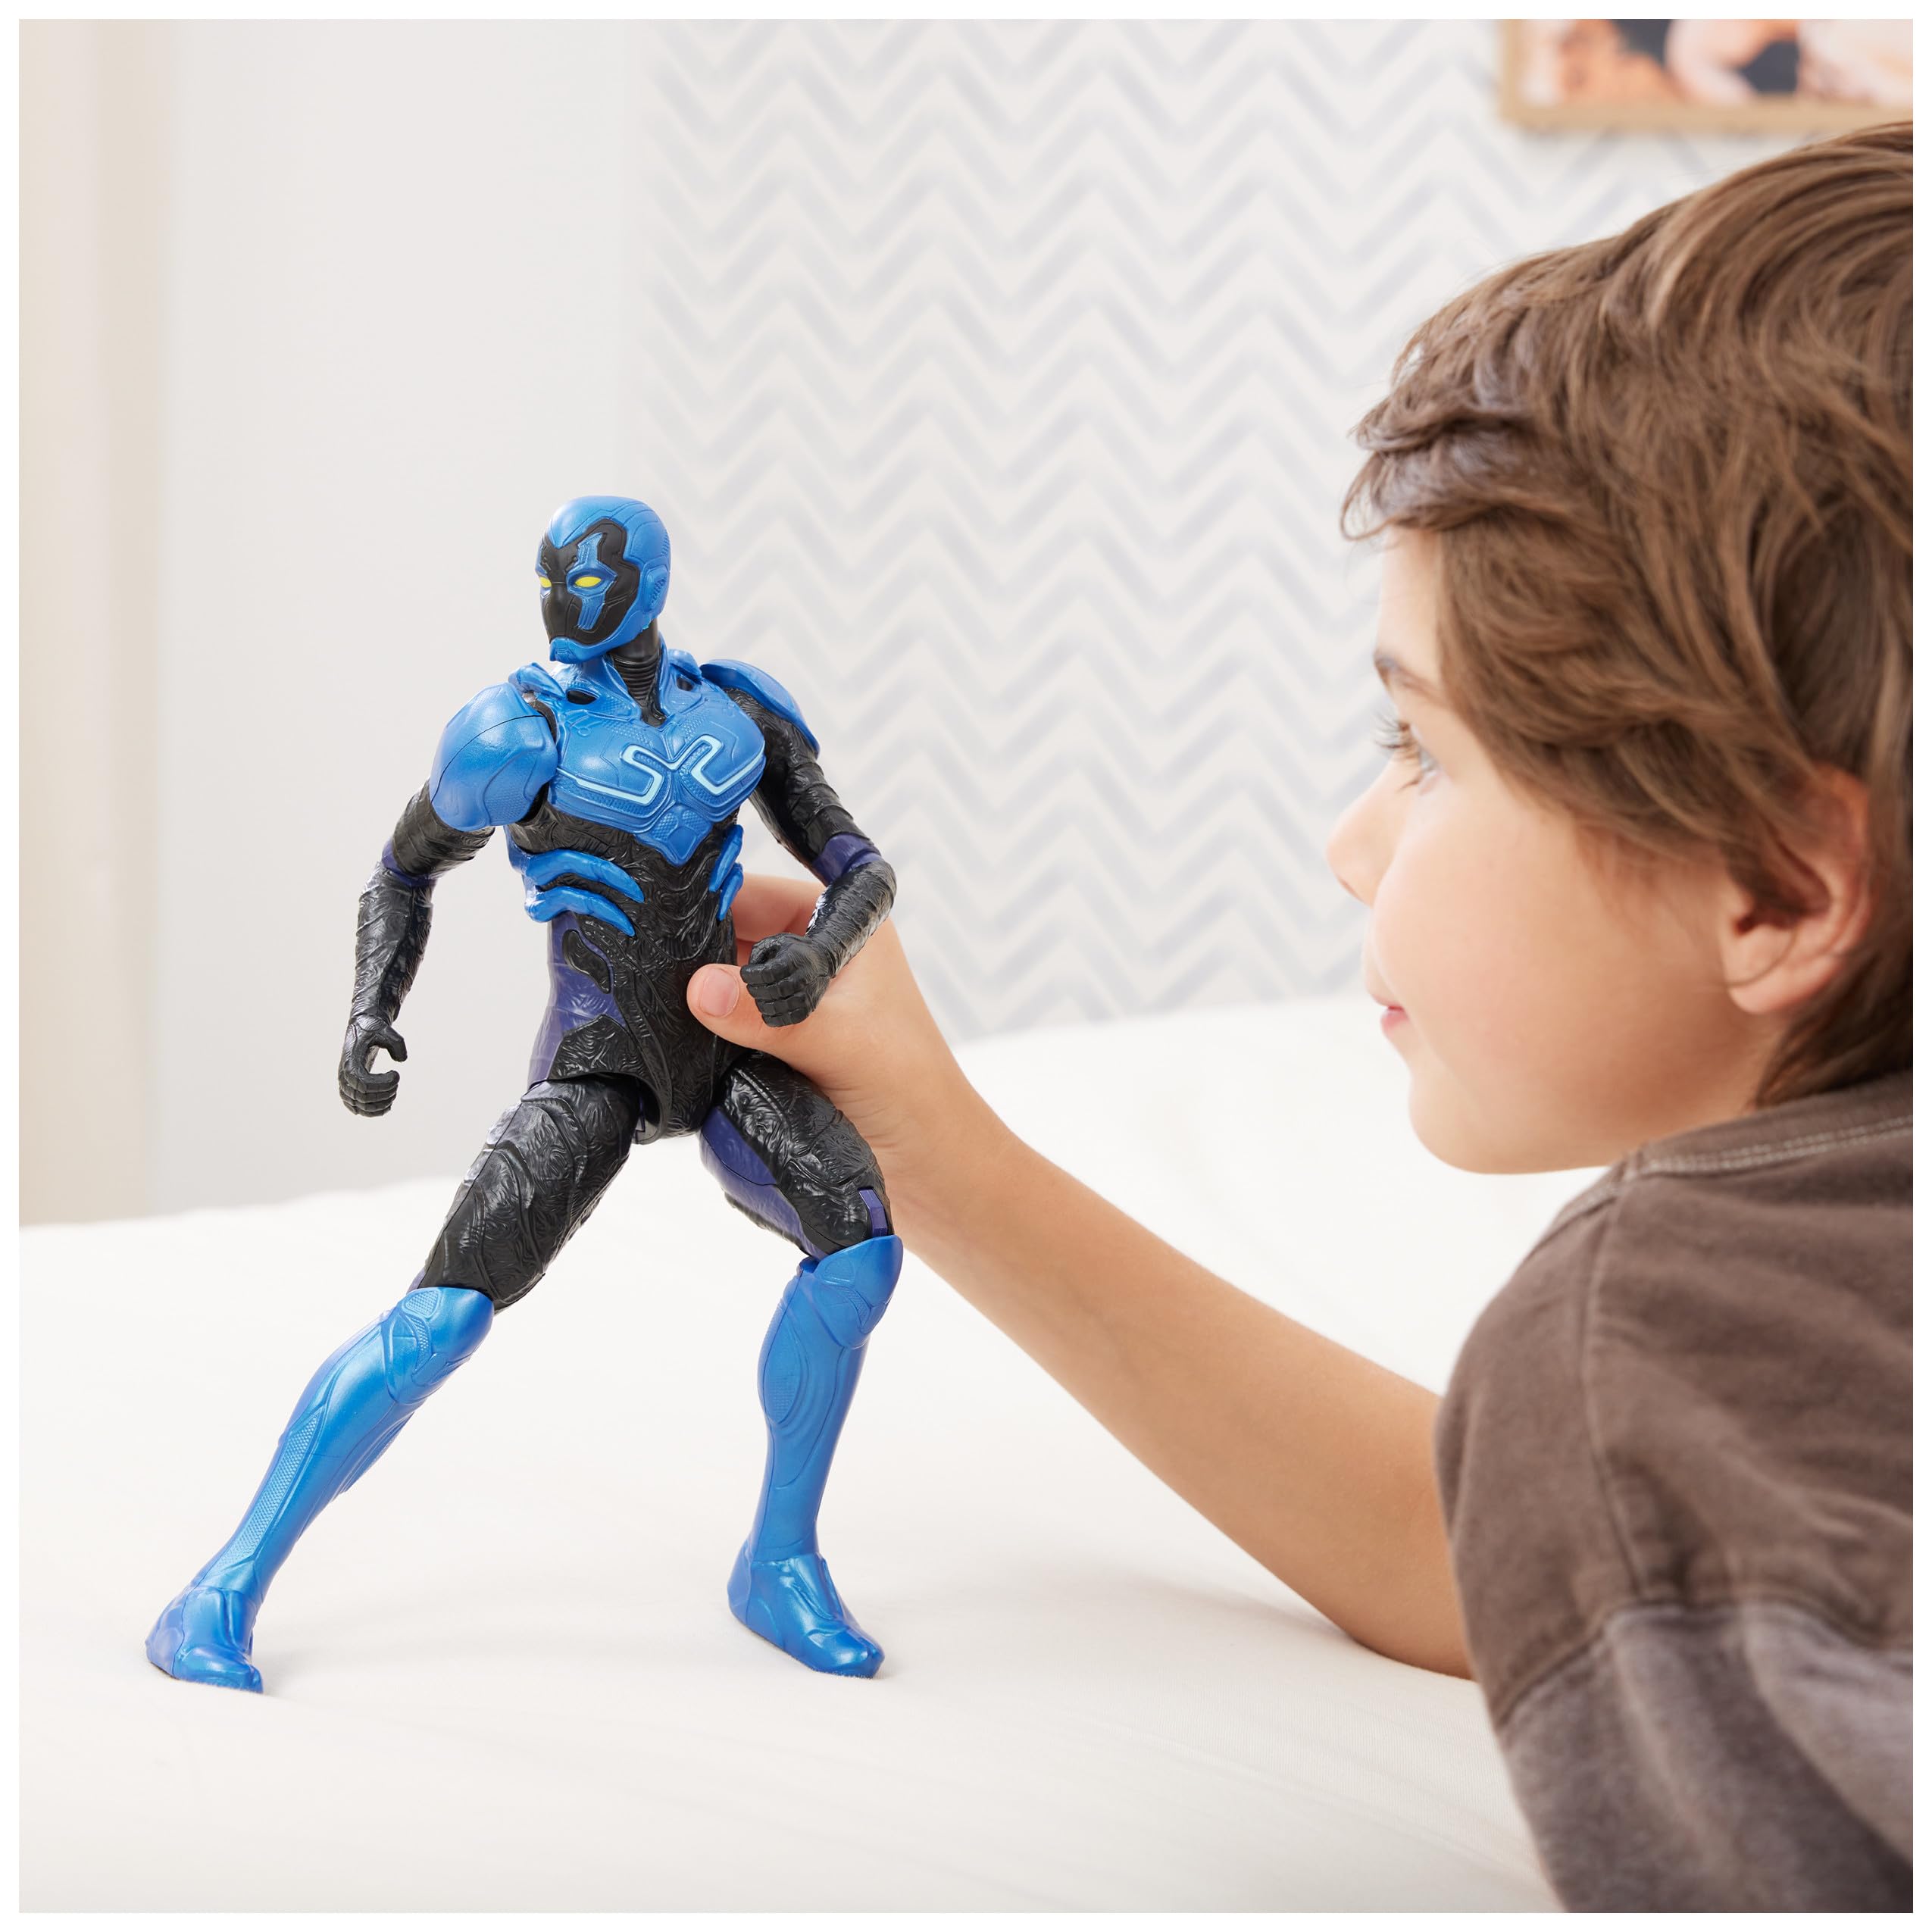 DC Comics, Hero-Mode Blue Beetle Action Figure, 12-inch, Easy to Pose, Blue Beetle Movie Collectible Superhero Kids Toys for Boys & Girls, Ages 3+